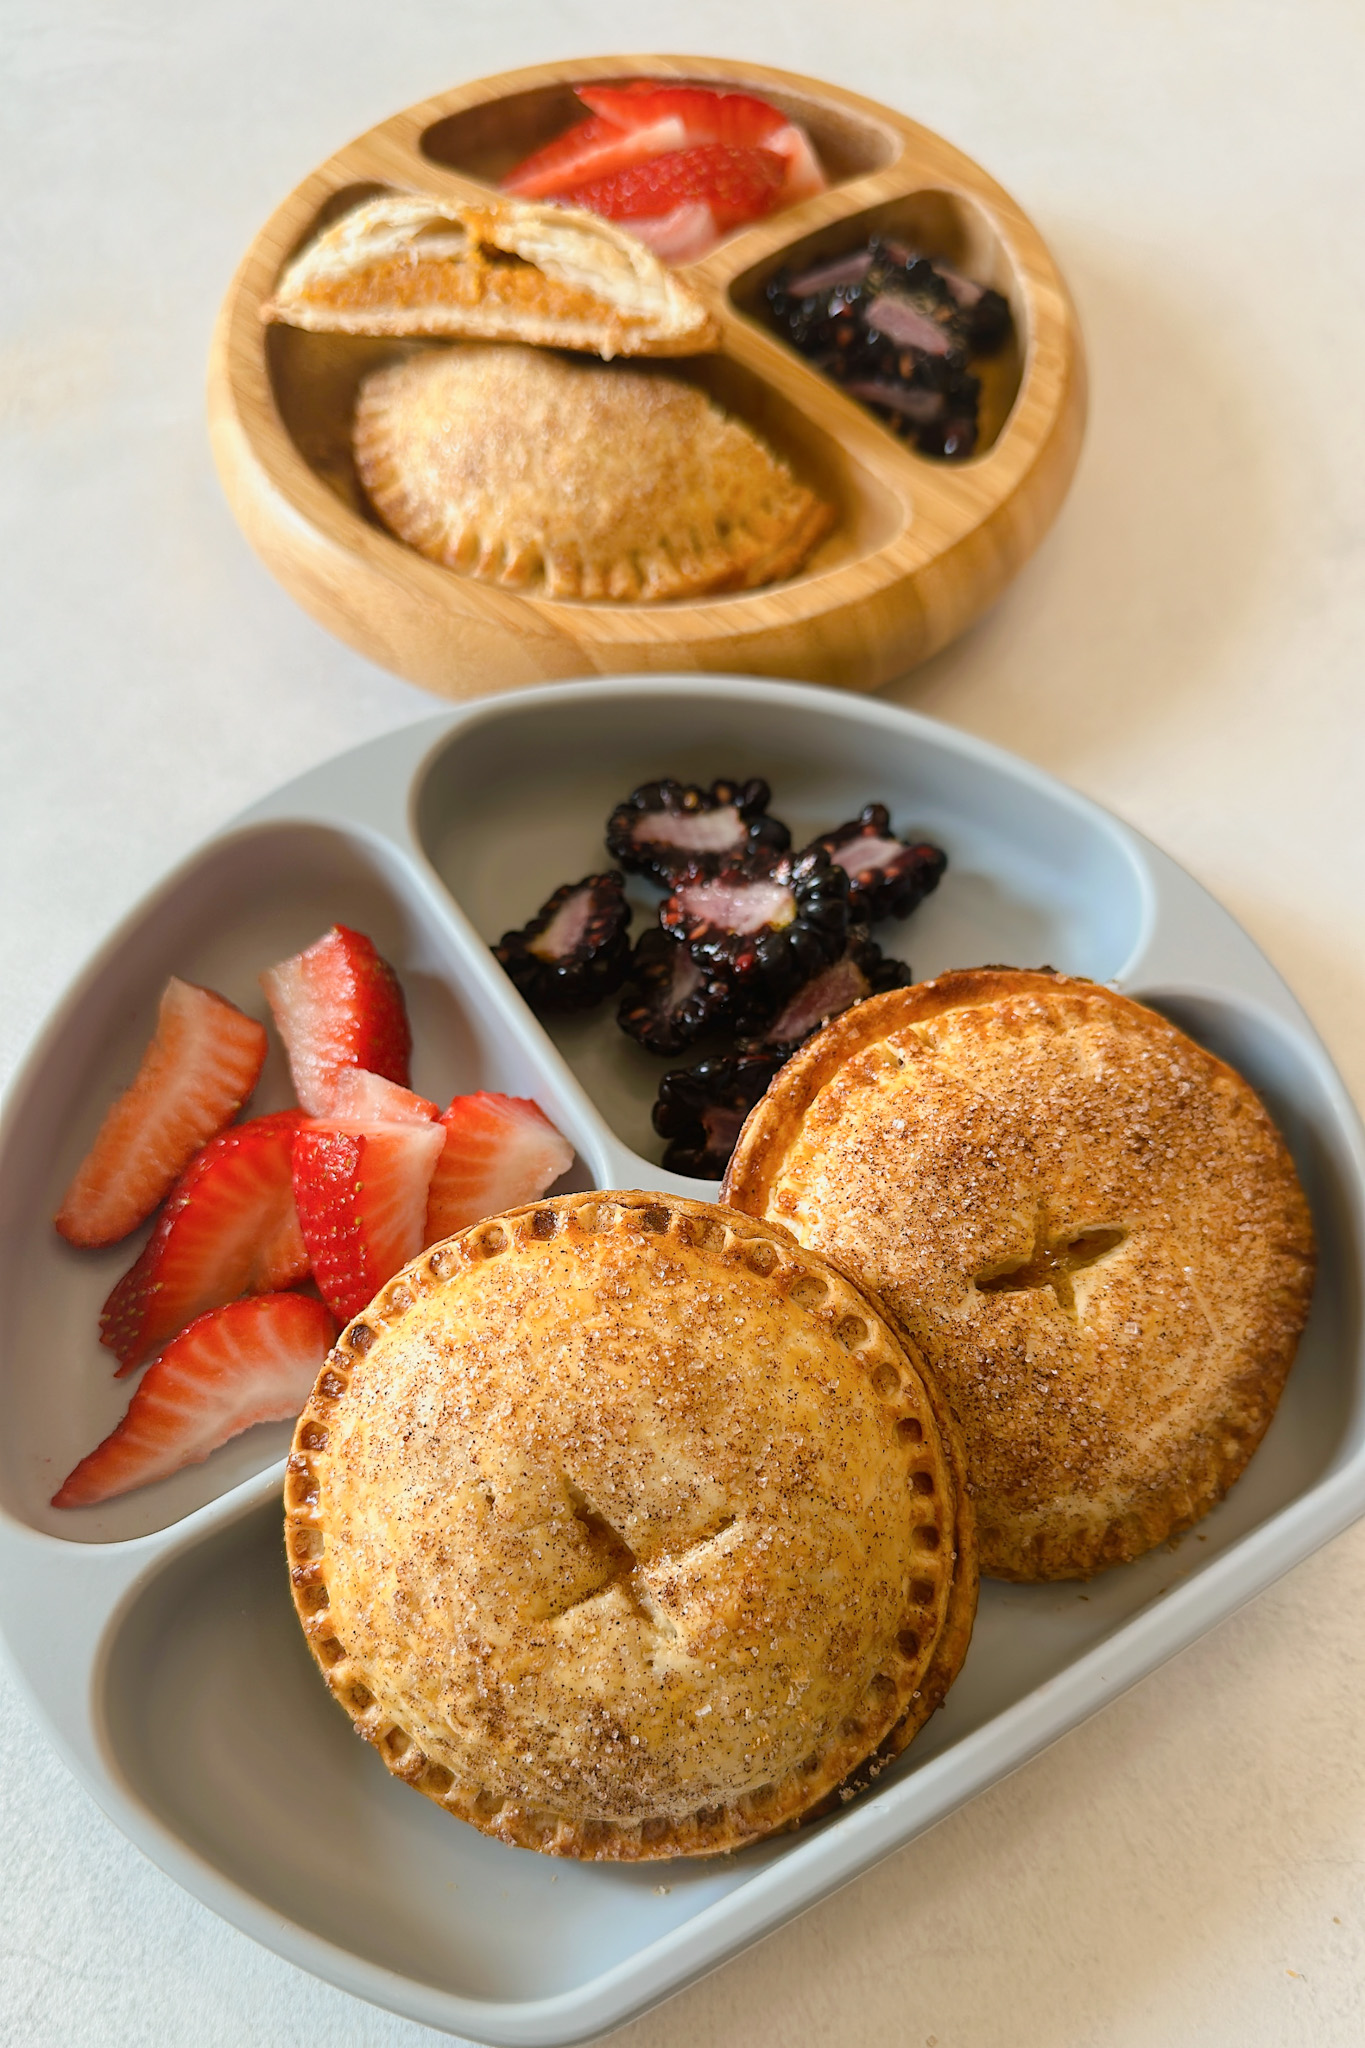 Sweet potato hand pies served with strawberries and blackberries.